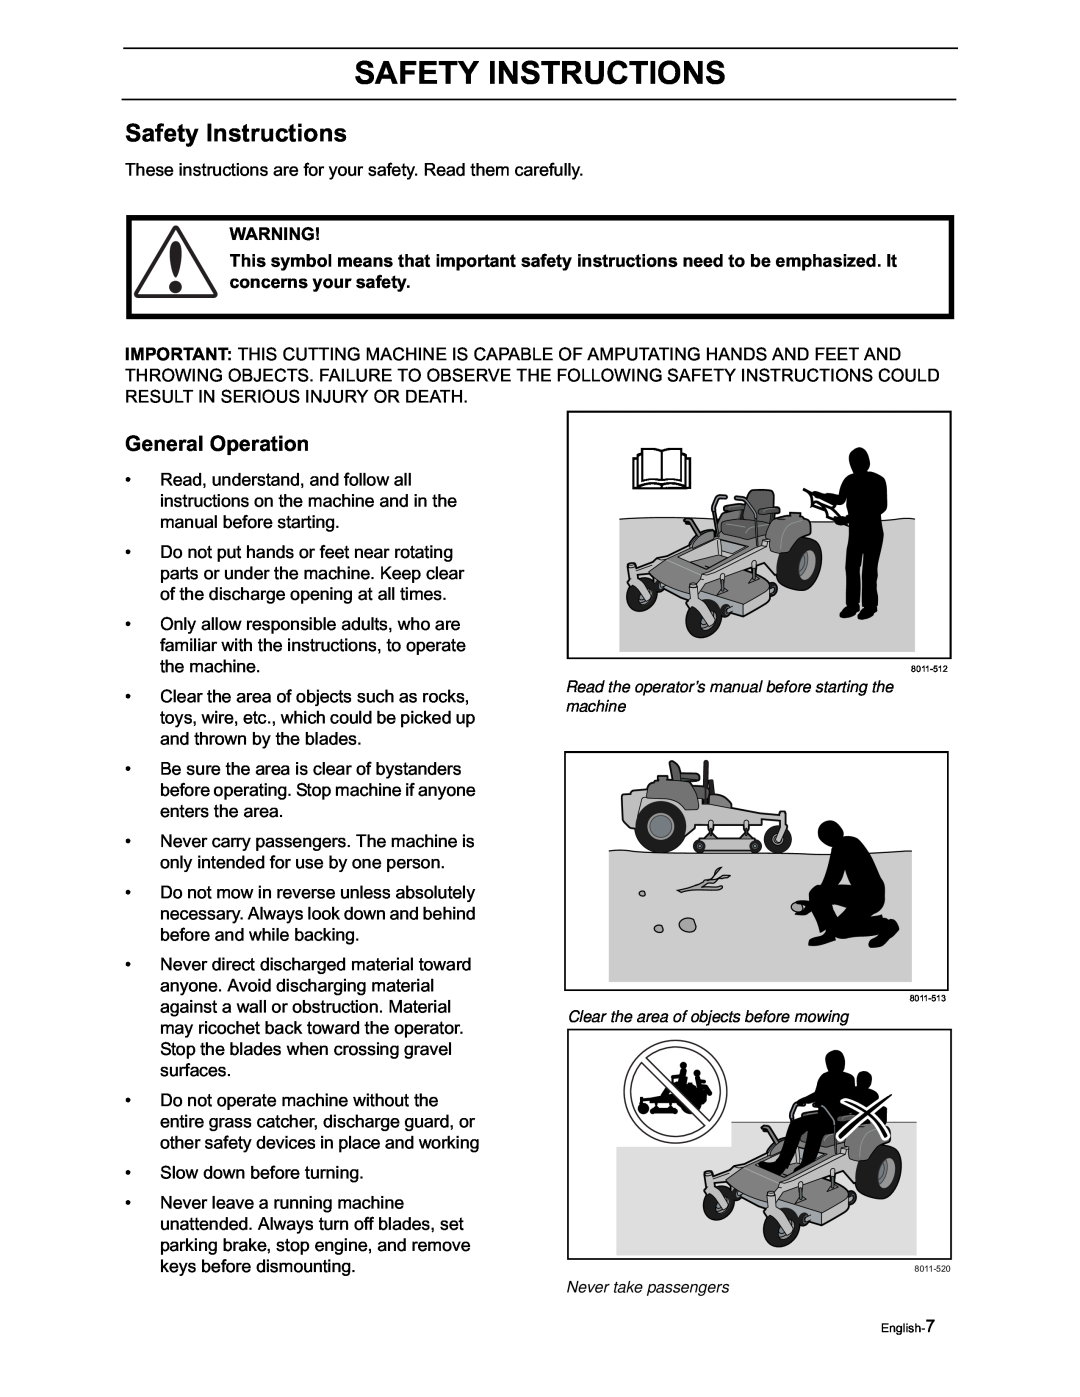 Yazoo/Kees ZVKH61273, ZVKW52253 manual Safety Instructions, General Operation 